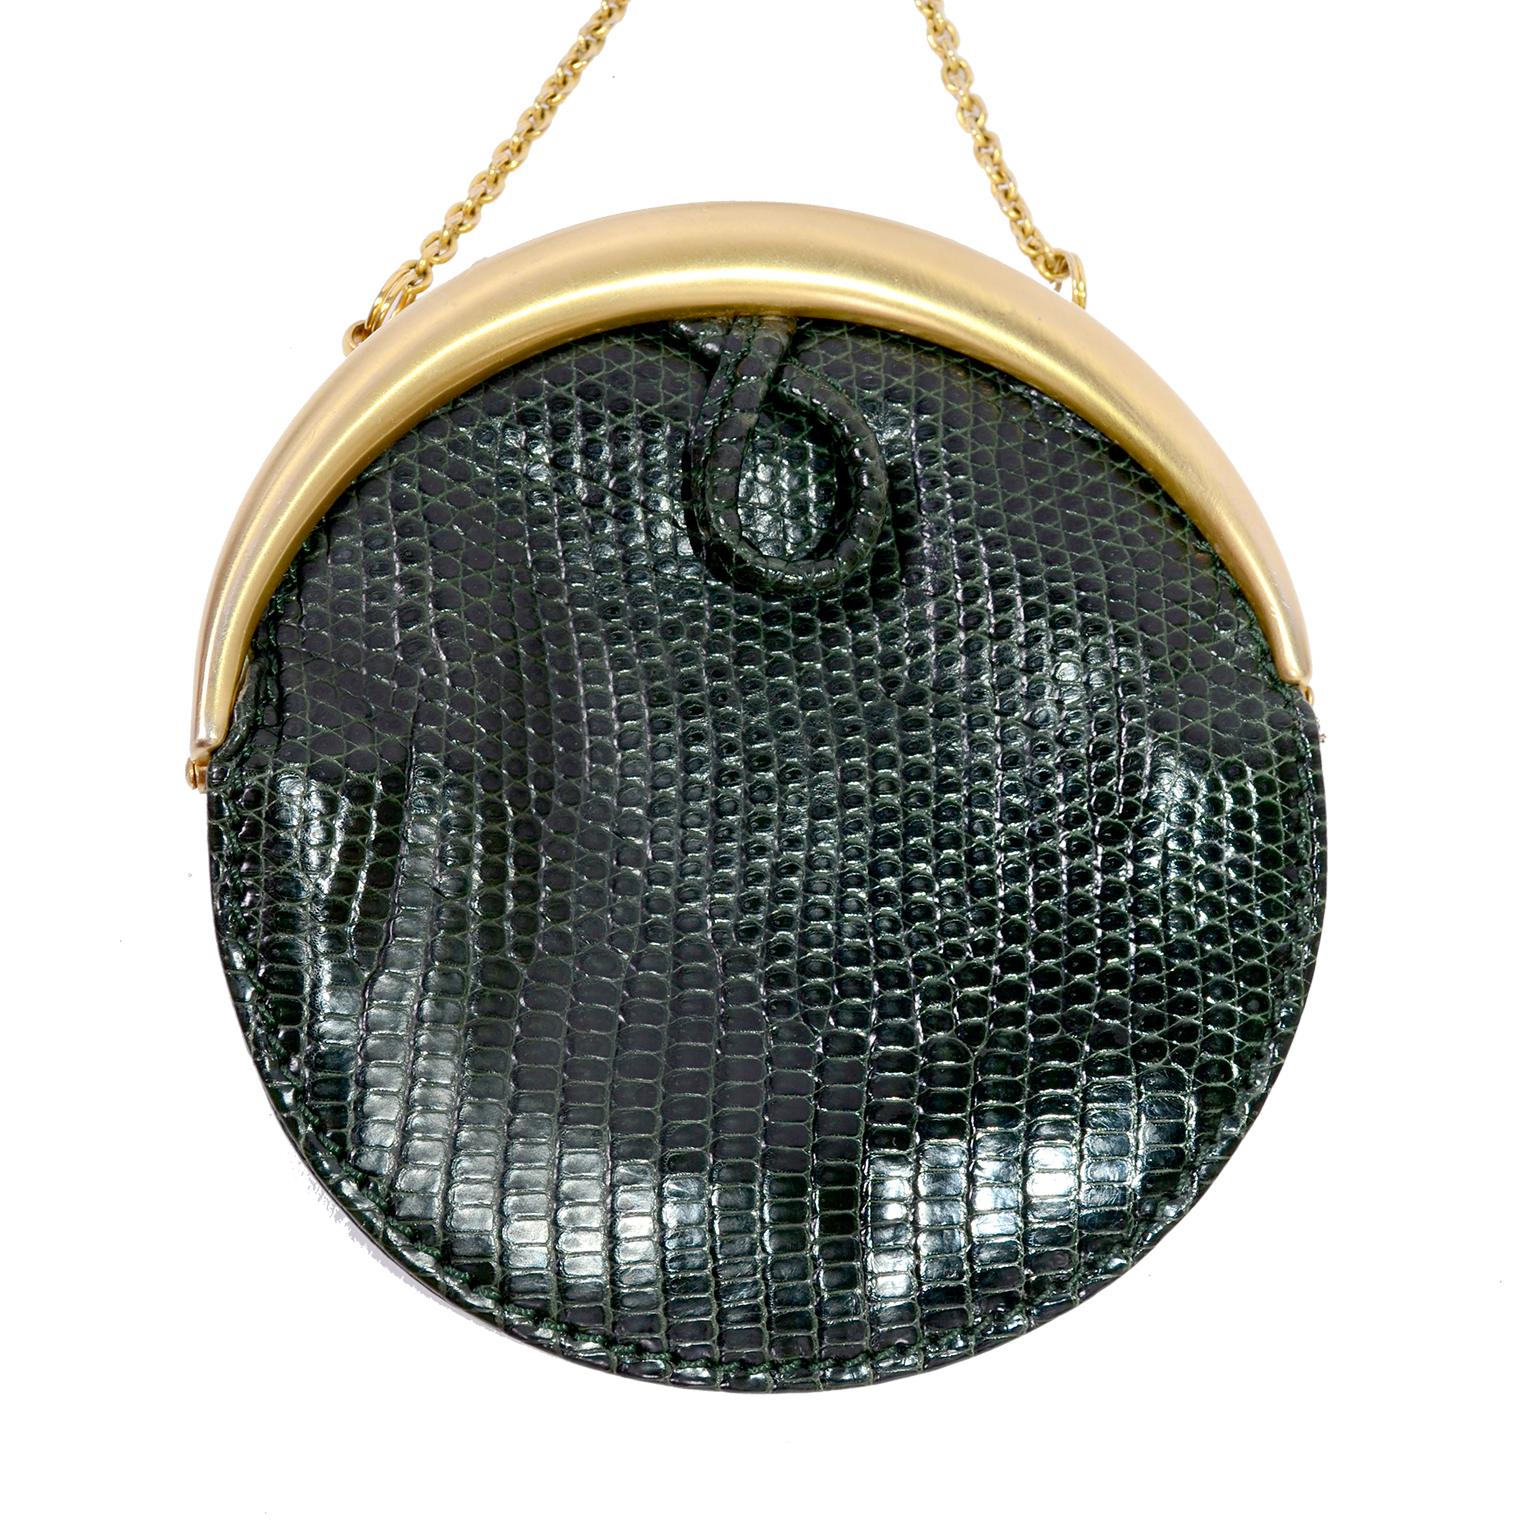 This is a great, small round green snakeskin Gucci handbag with gold hardware chain and pronged hook. The green snakeskin is soft and supple and has a loop on both sides. The chain attached to the purse has a gold piece with two prongs that